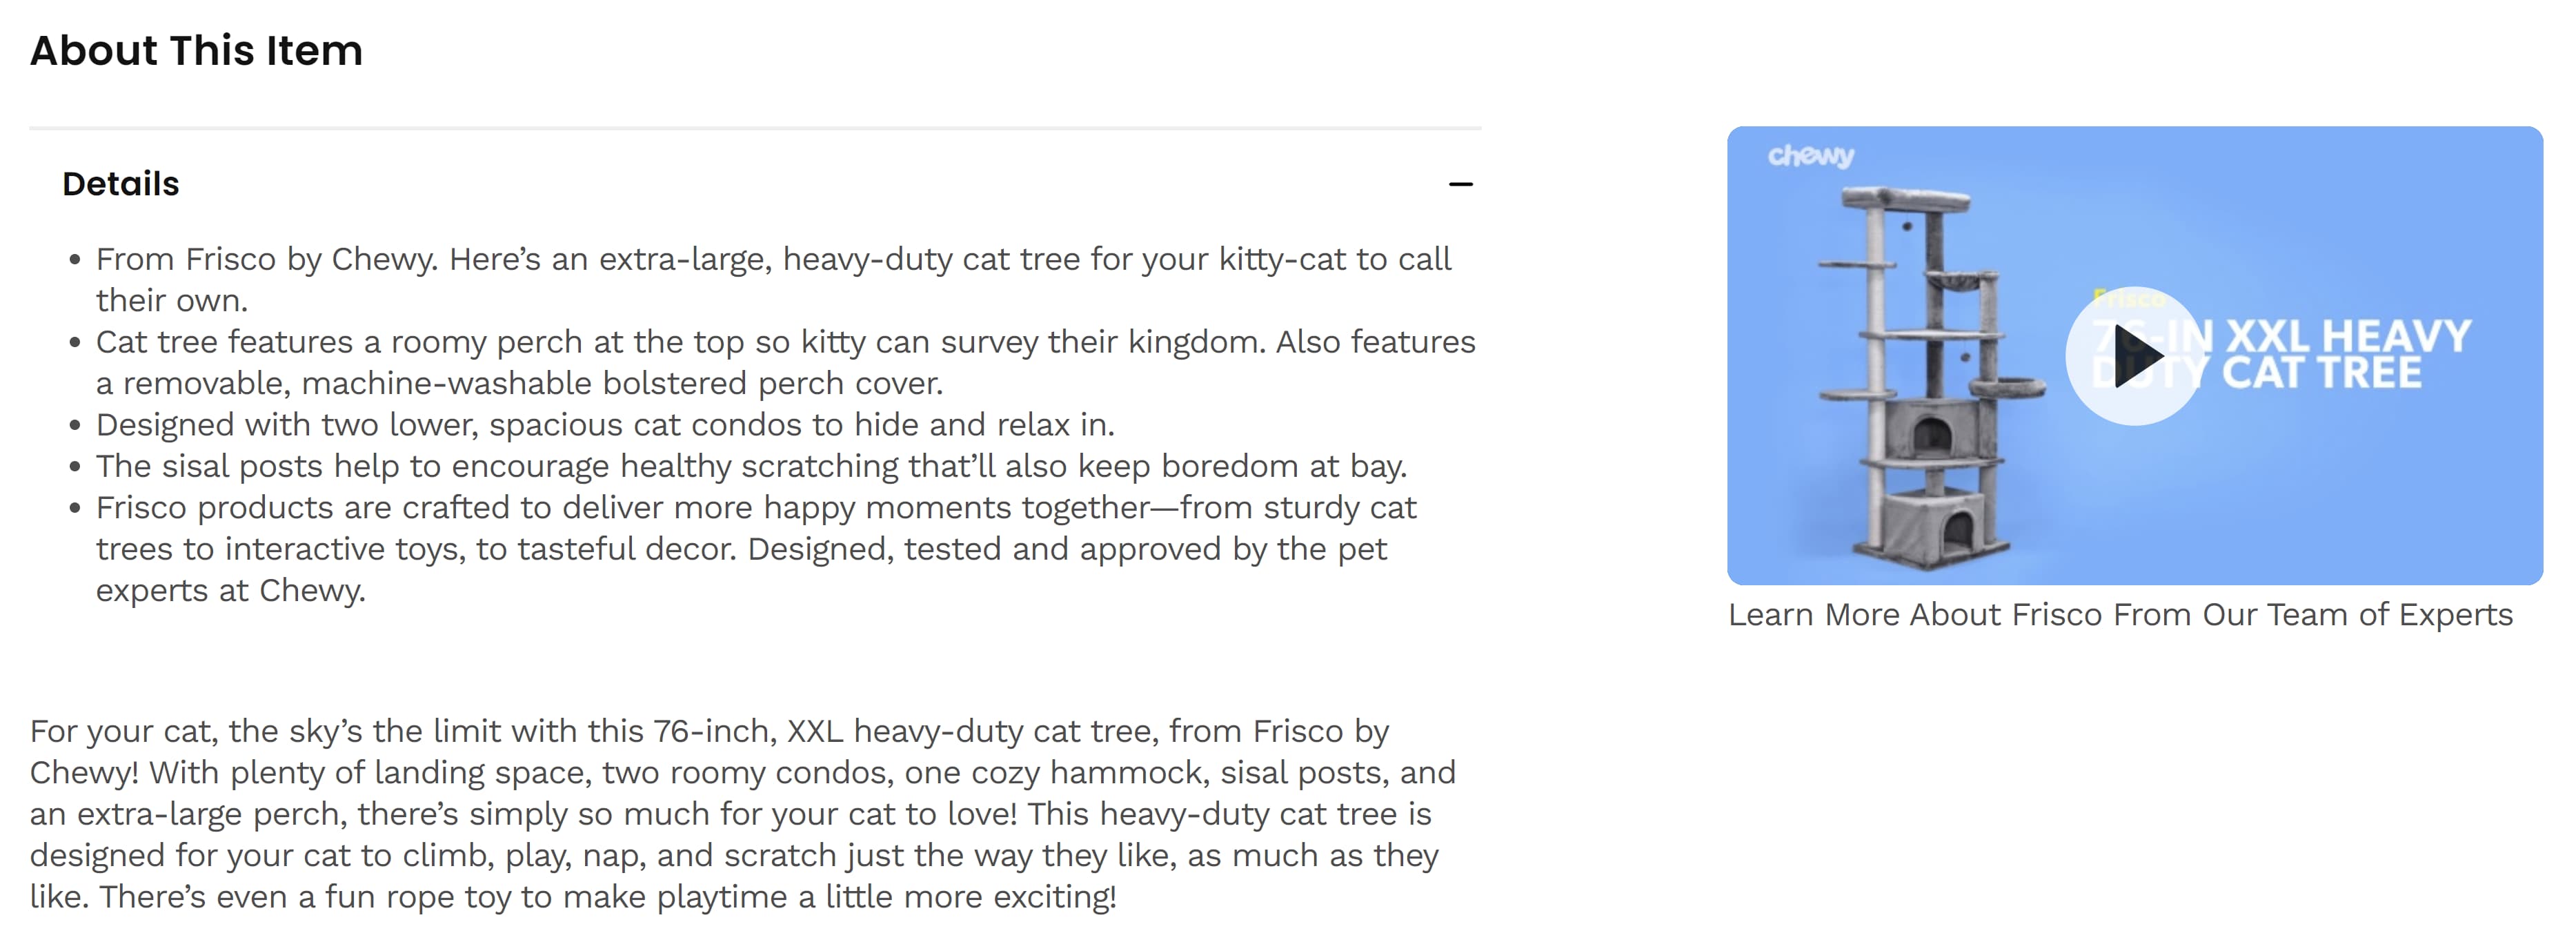 Screenshot of the cat tree's product features.